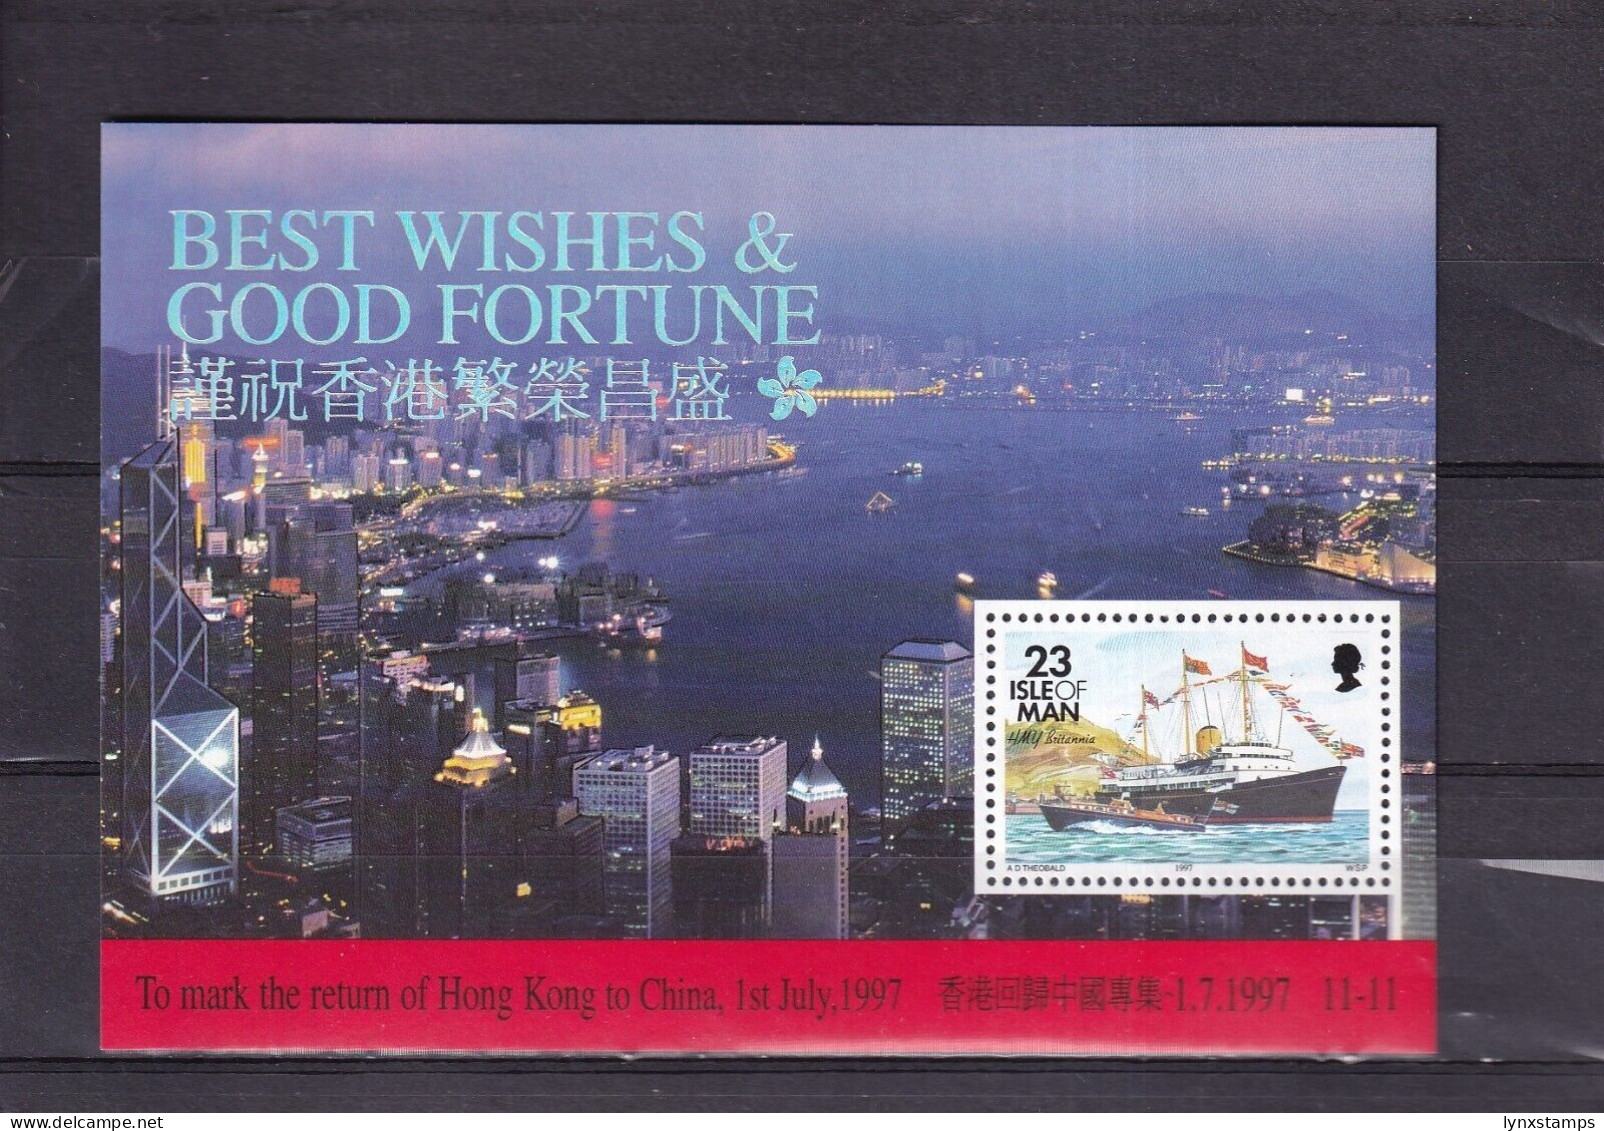 ER04 Isle Of Man 1997 Best Wishes & Good Forture, Royal Yacht Britannia MNH - Local Issues